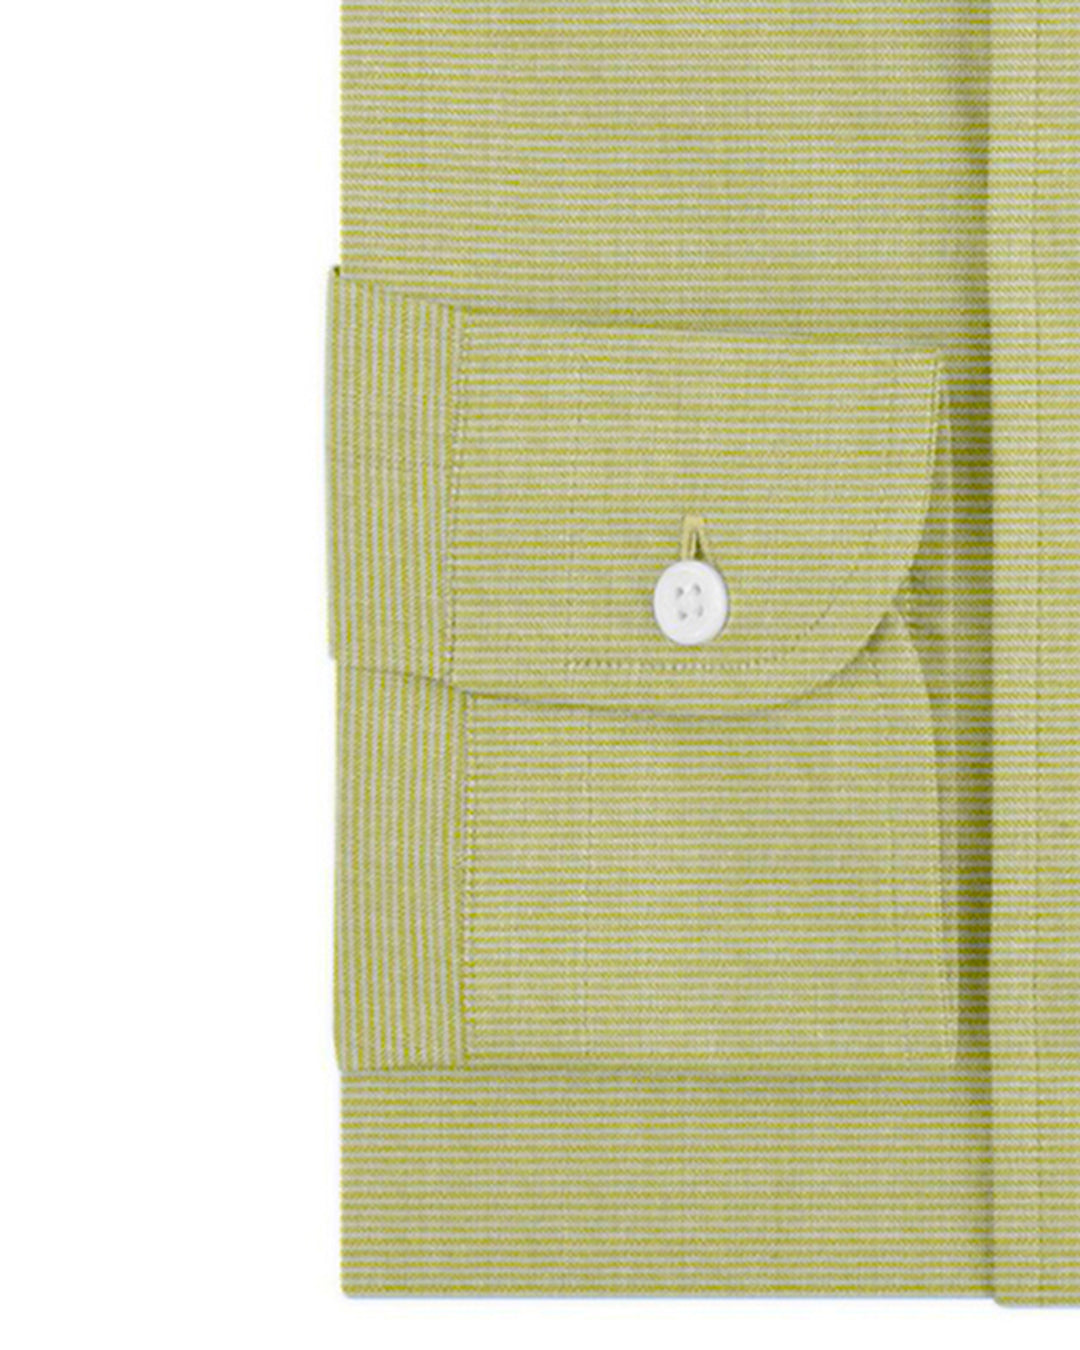 Cuff of the custom linen shirt for men in lemon green by Luxire Clothing